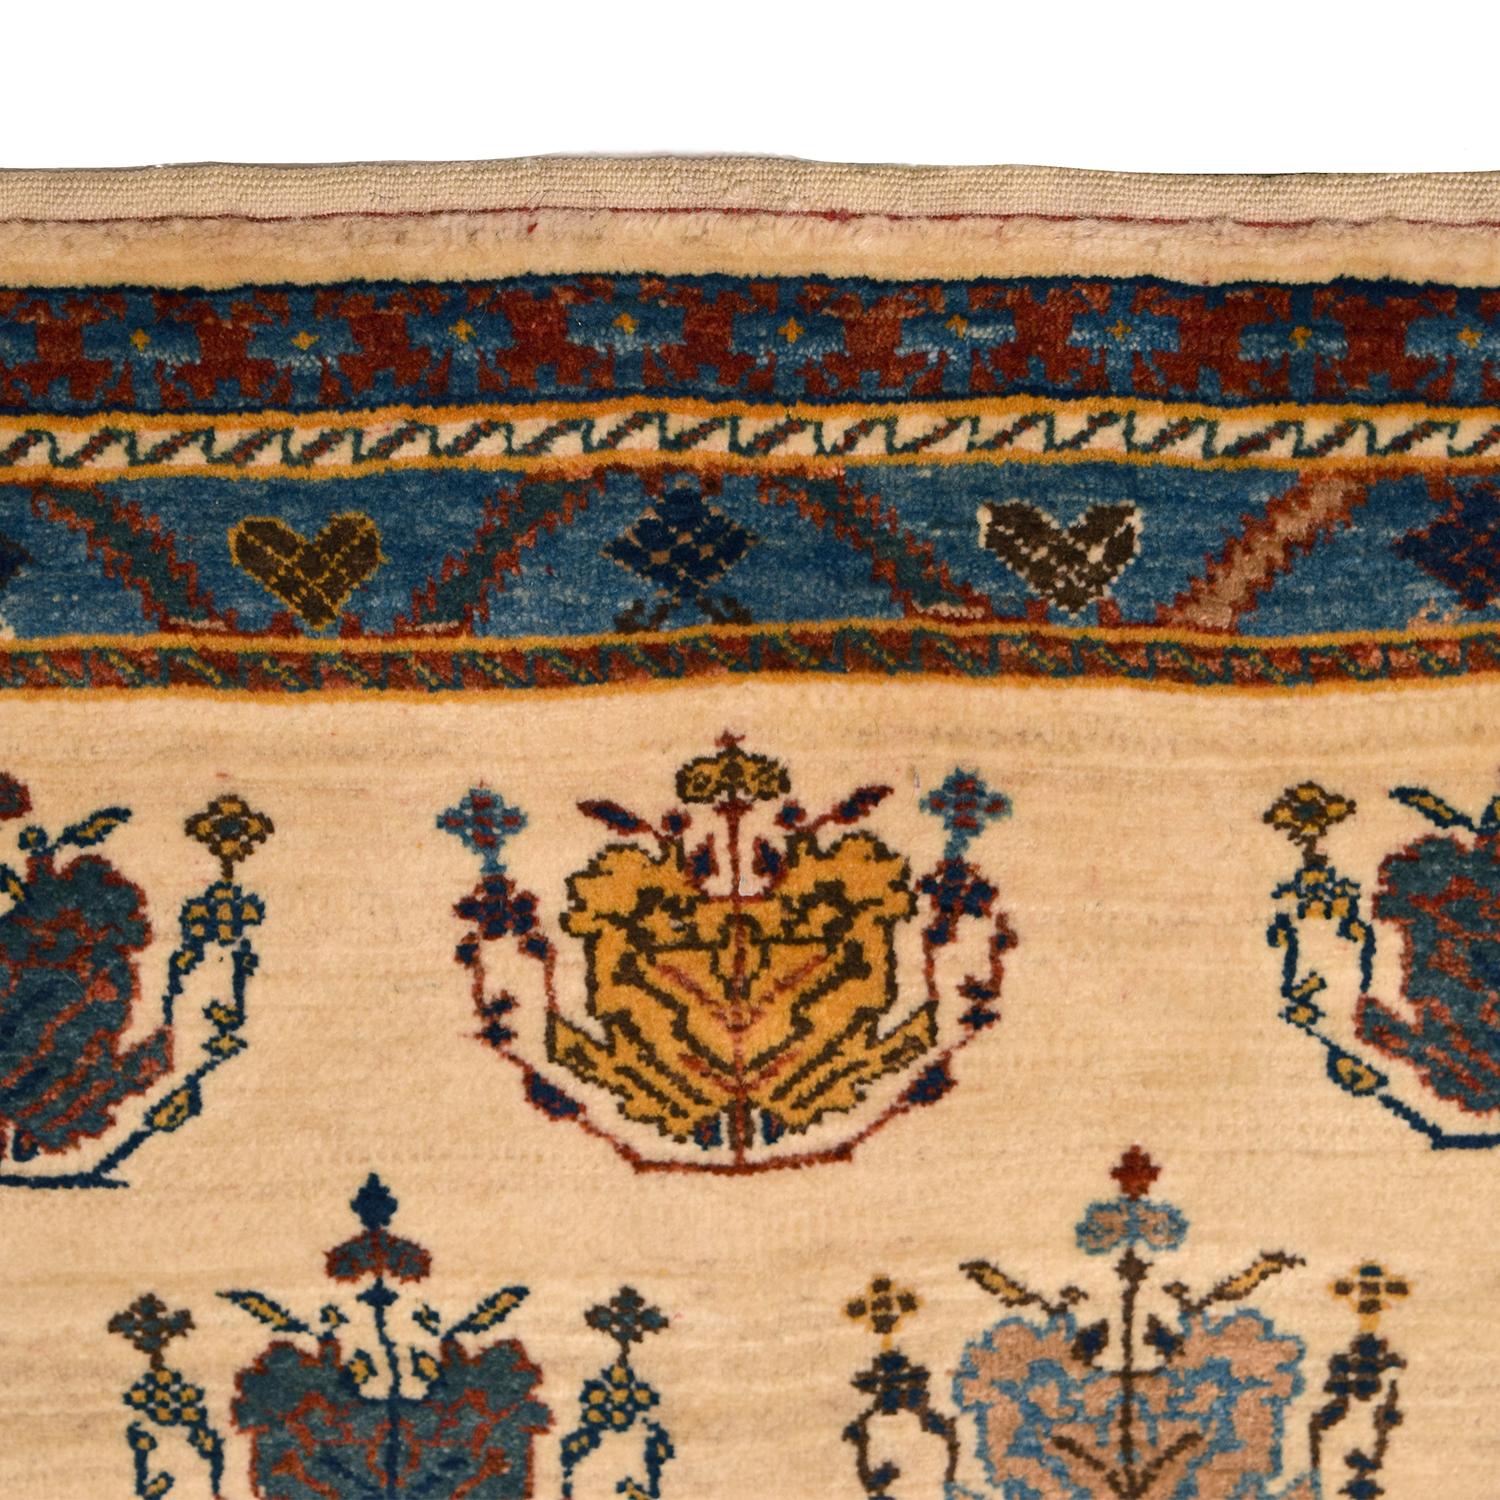 Utilizing cream and blue tones to create a peaceful and inviting pattern, this vintage Persian Kashkouli carpet is hand-knotted and measures 3’9” x 5’8”. To obtain these bright shades of gold, red, blue, and green wool, the weaver utilized organic